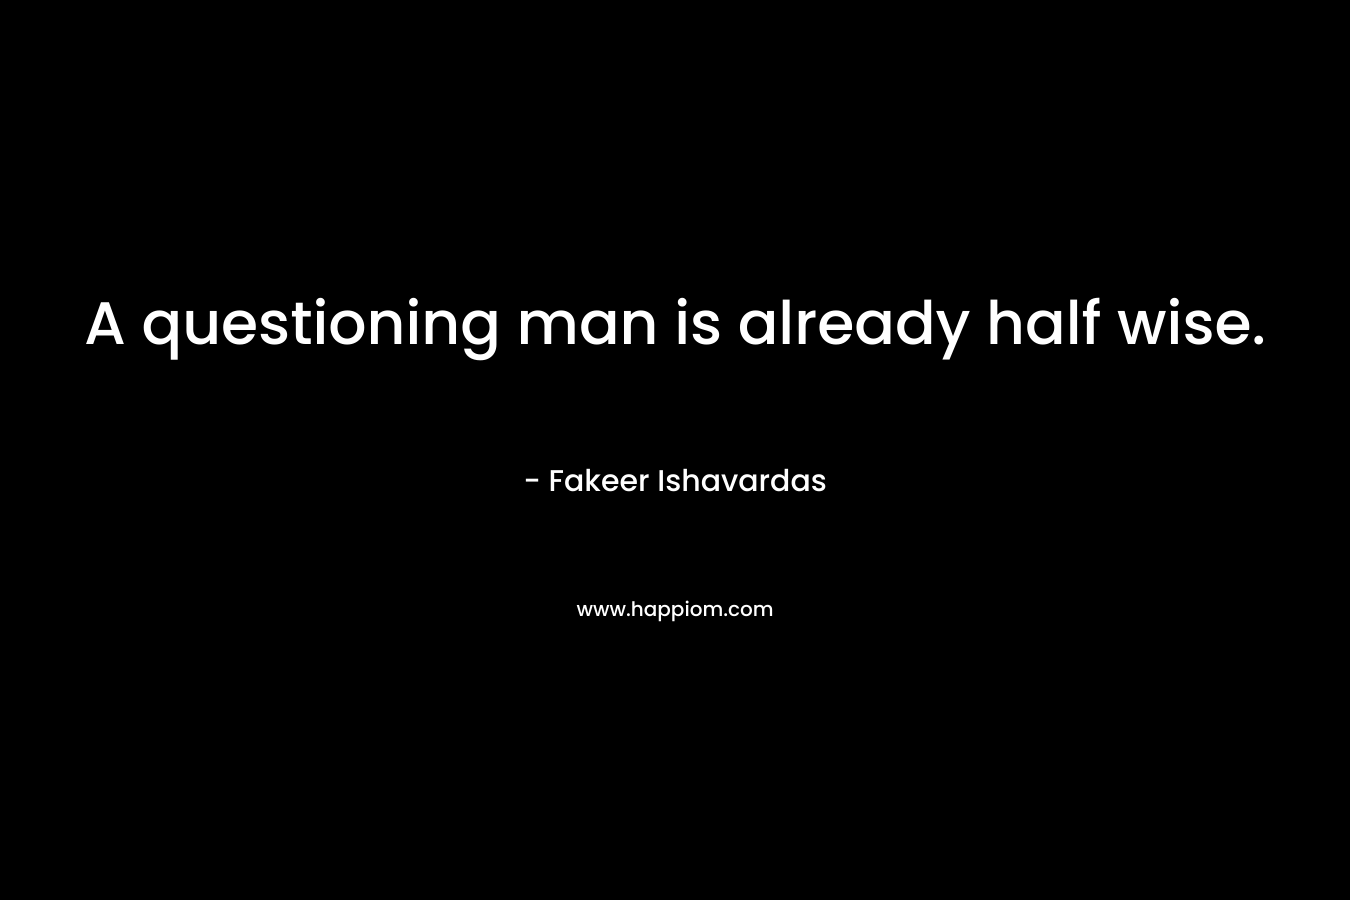 A questioning man is already half wise.